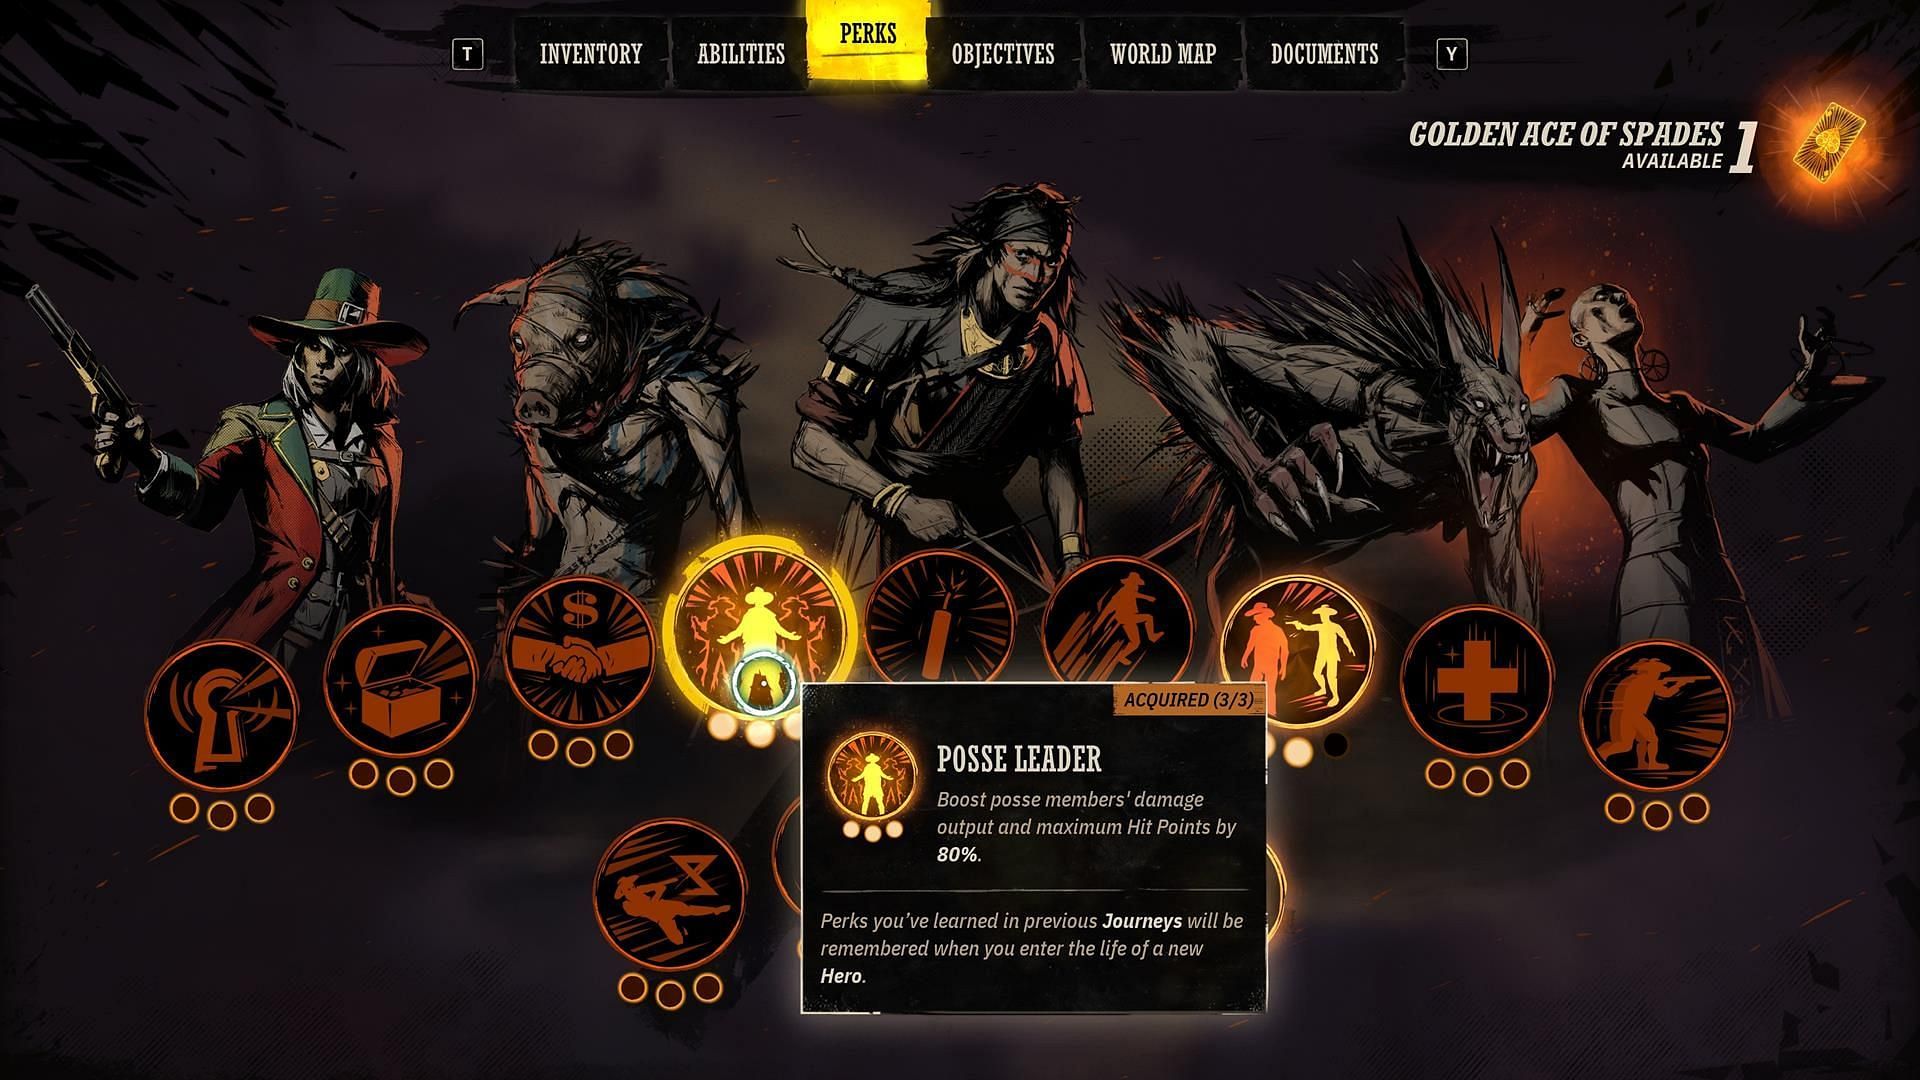 A look at the Perks page (Image via Devolver Digital)